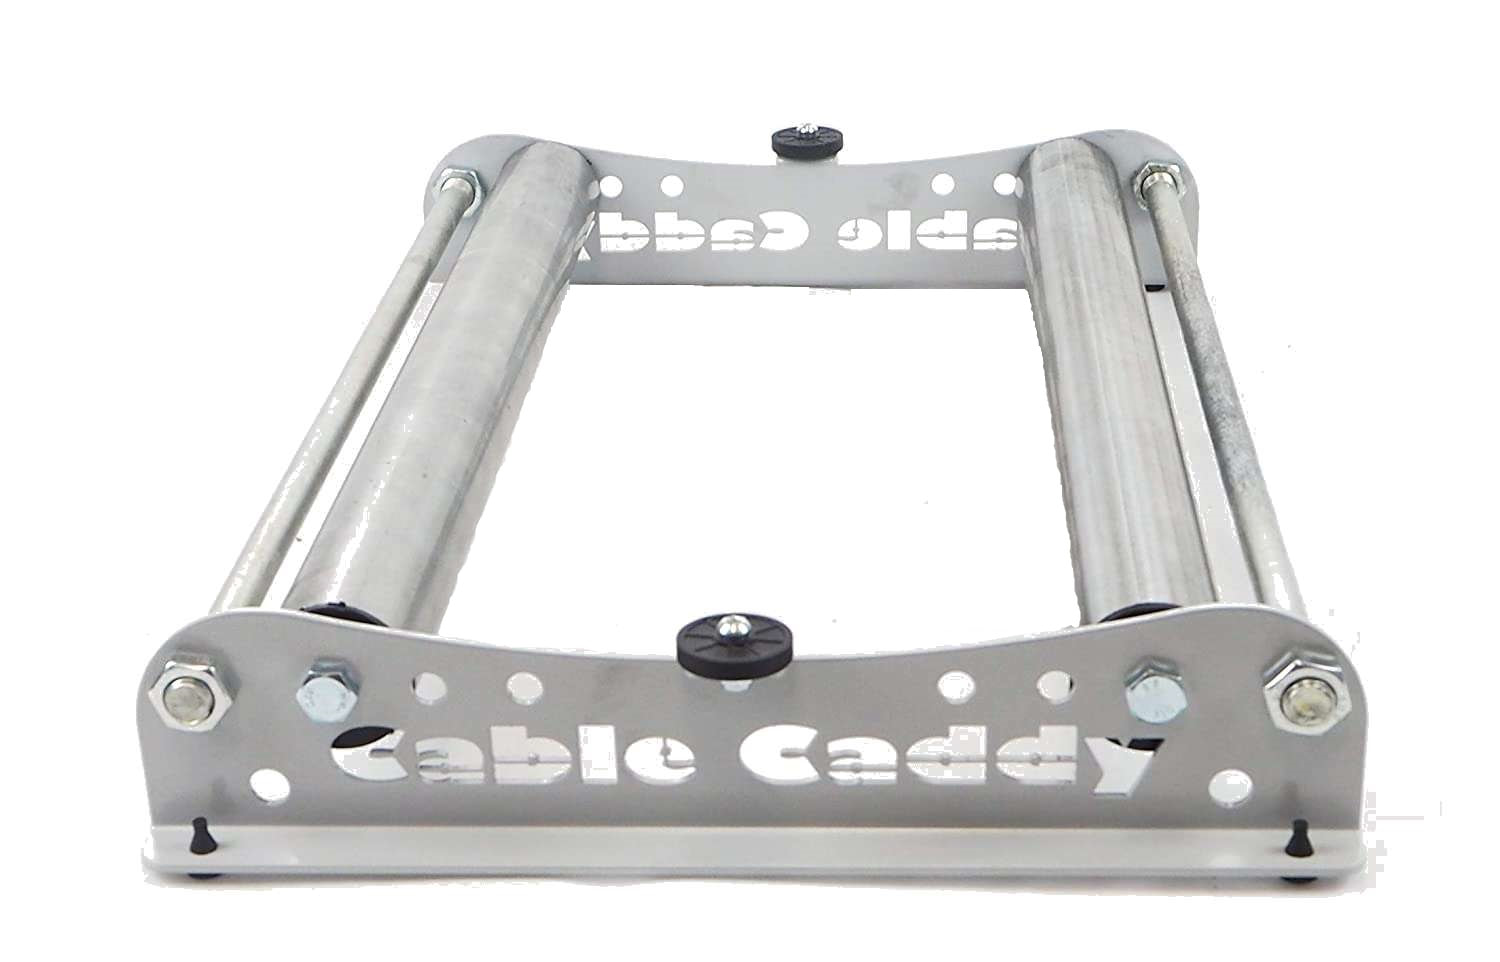 Cable Caddy